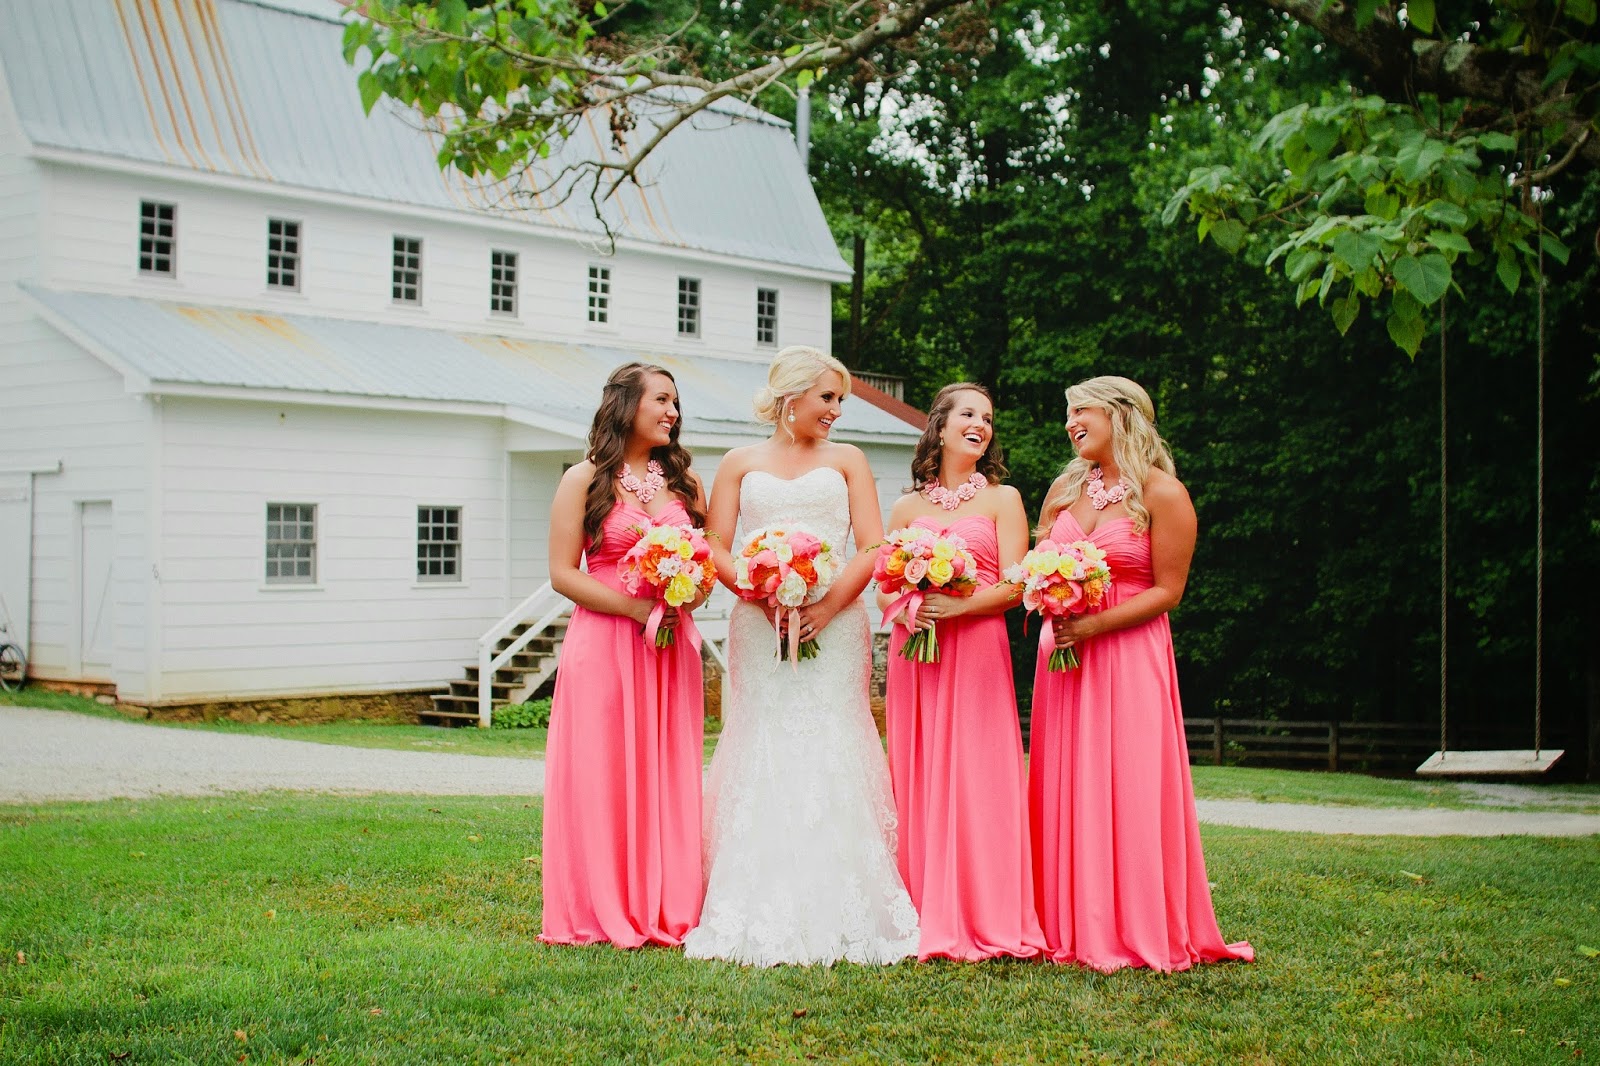 Perfect Bridesmaid Dress For Every Body Type